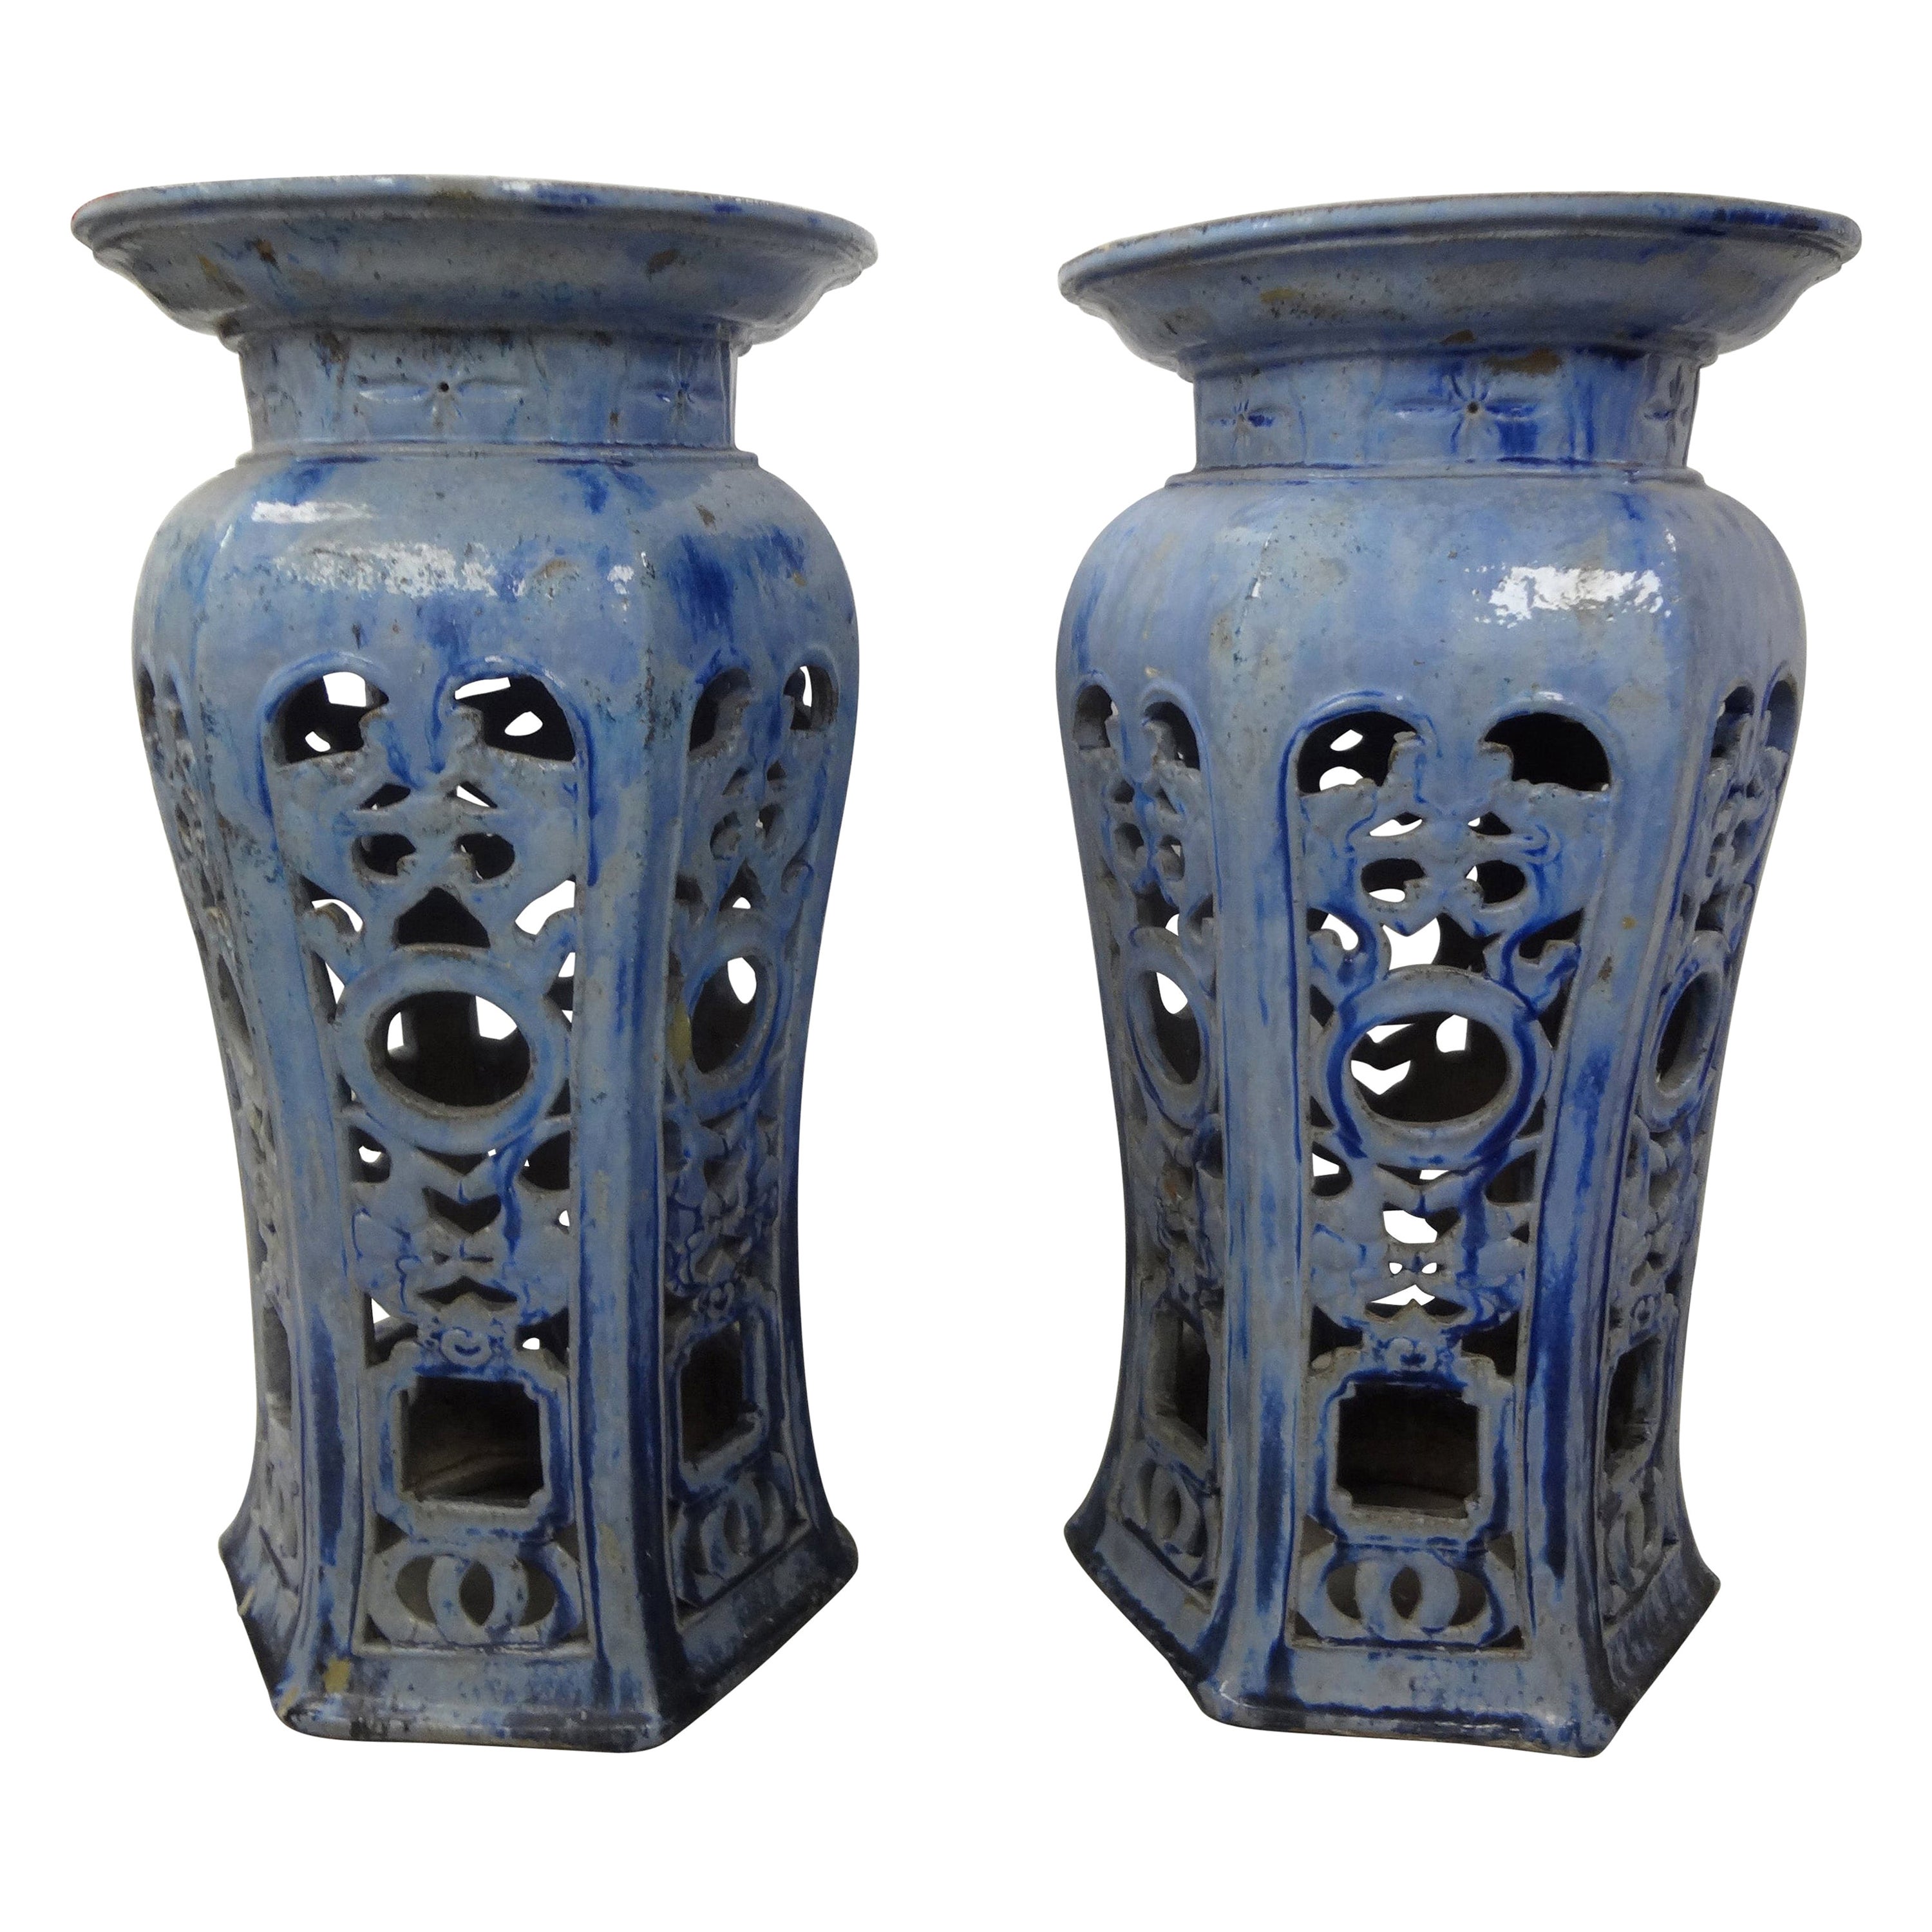 Pair of Early 20th Century Chinese Glazed Terra Cotta Pedestals or Stands